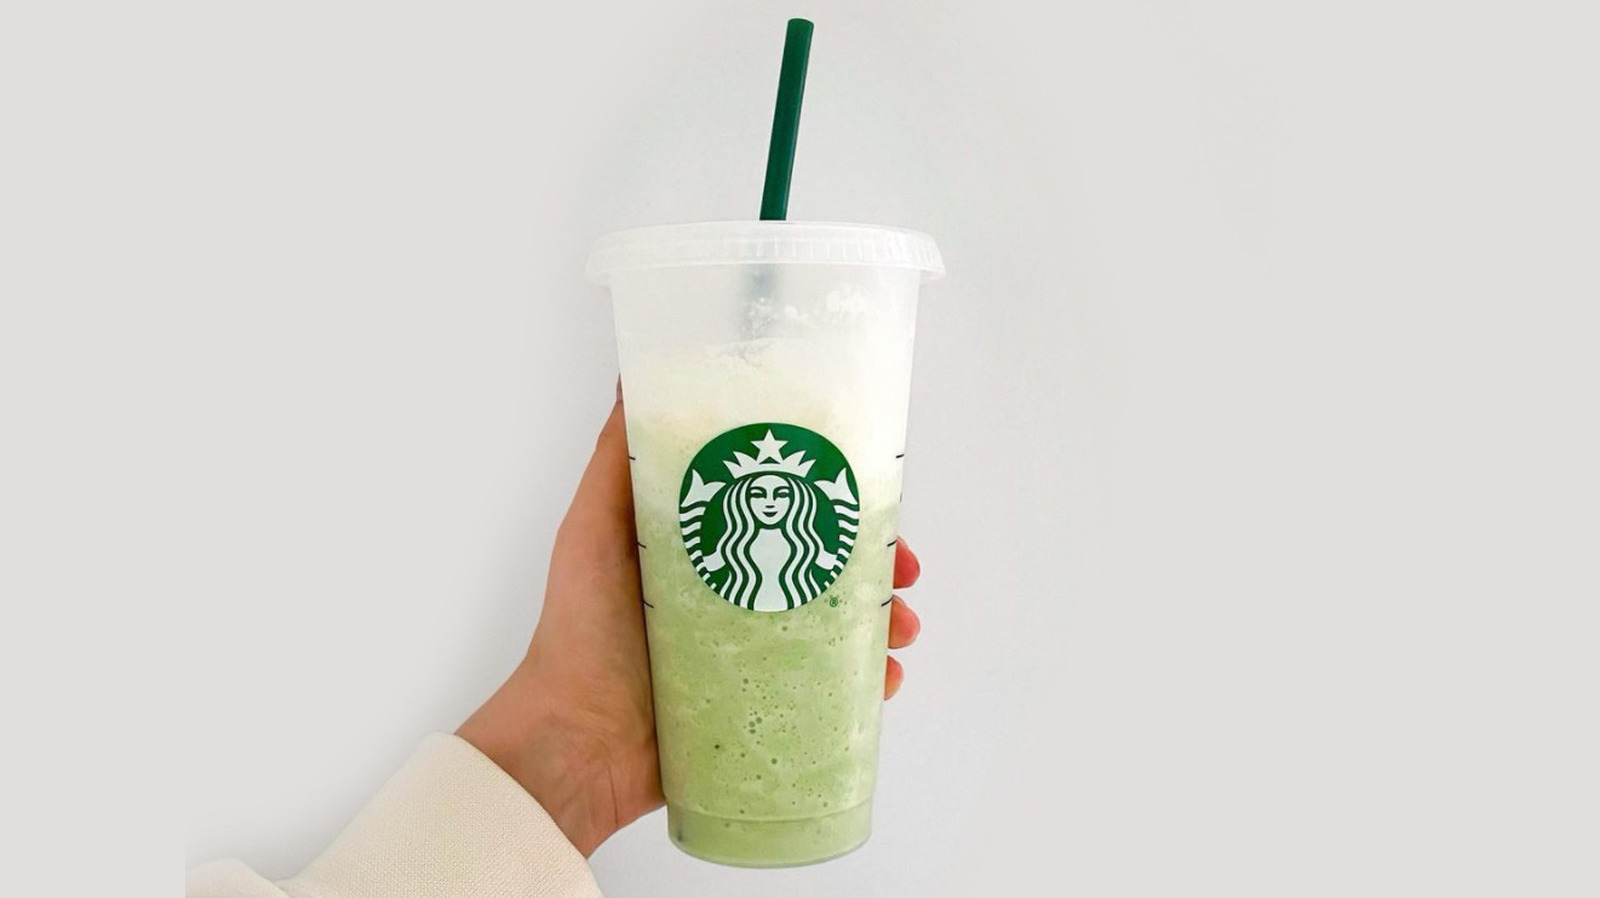 https://www.mashed.com/img/gallery/read-this-before-drinking-matcha-from-starbucks/l-intro-1615485887.jpg